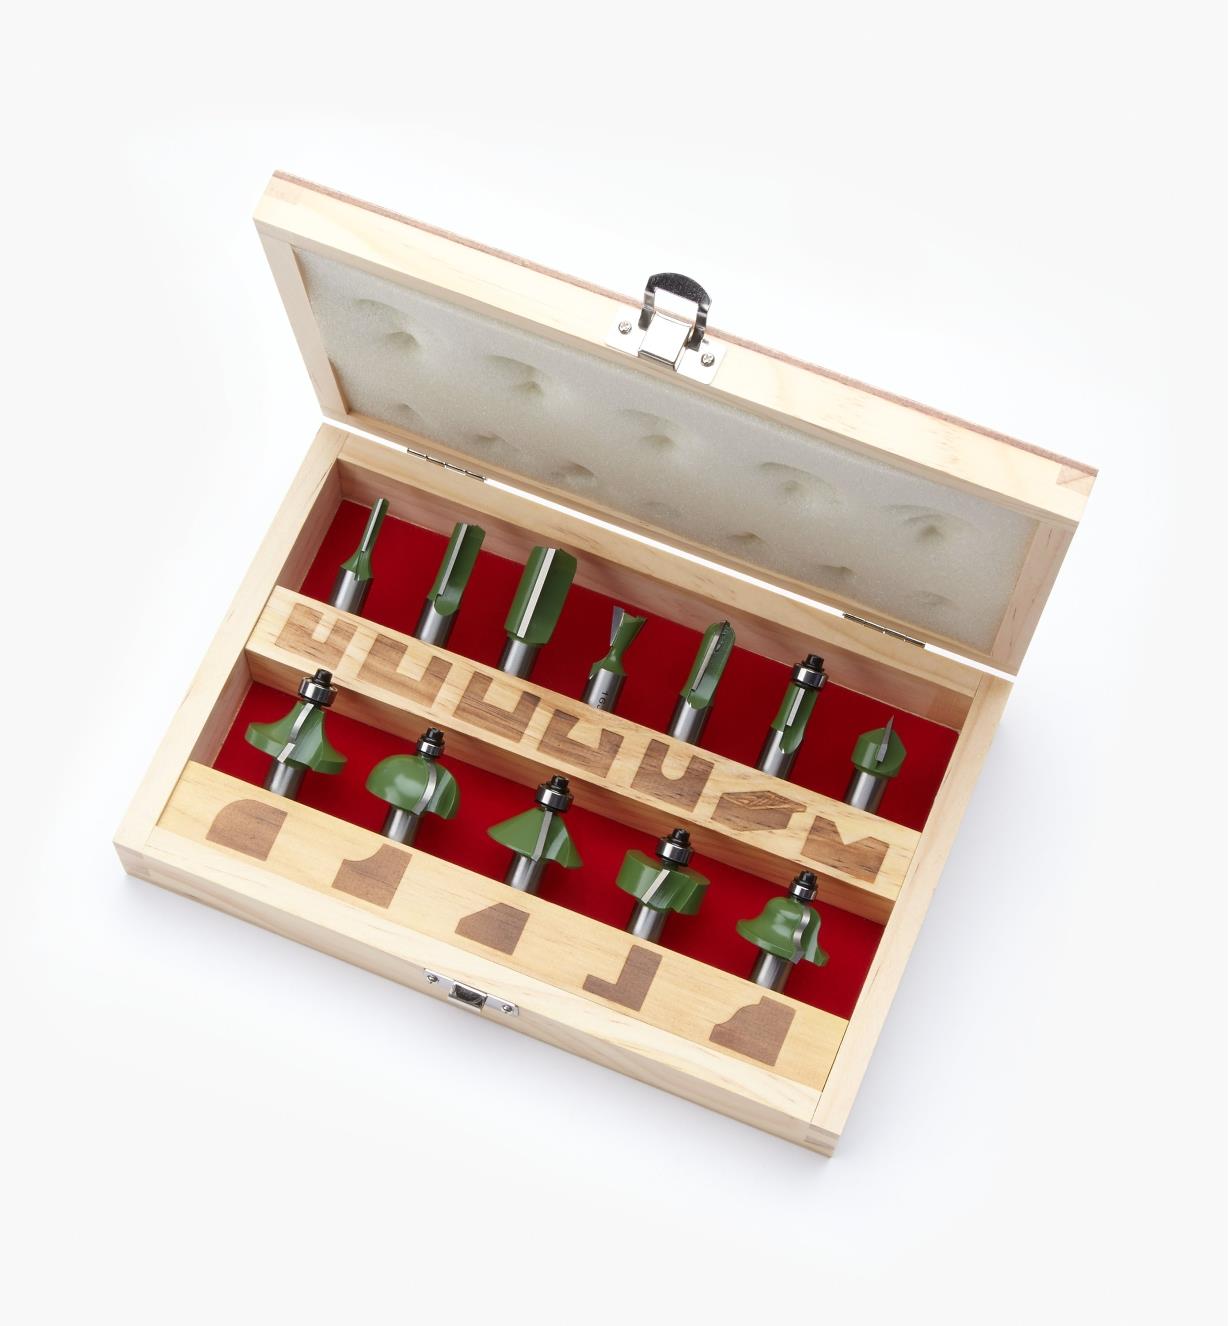 16J0101 - Box of 12 Router Bits, 1/2" Shanks